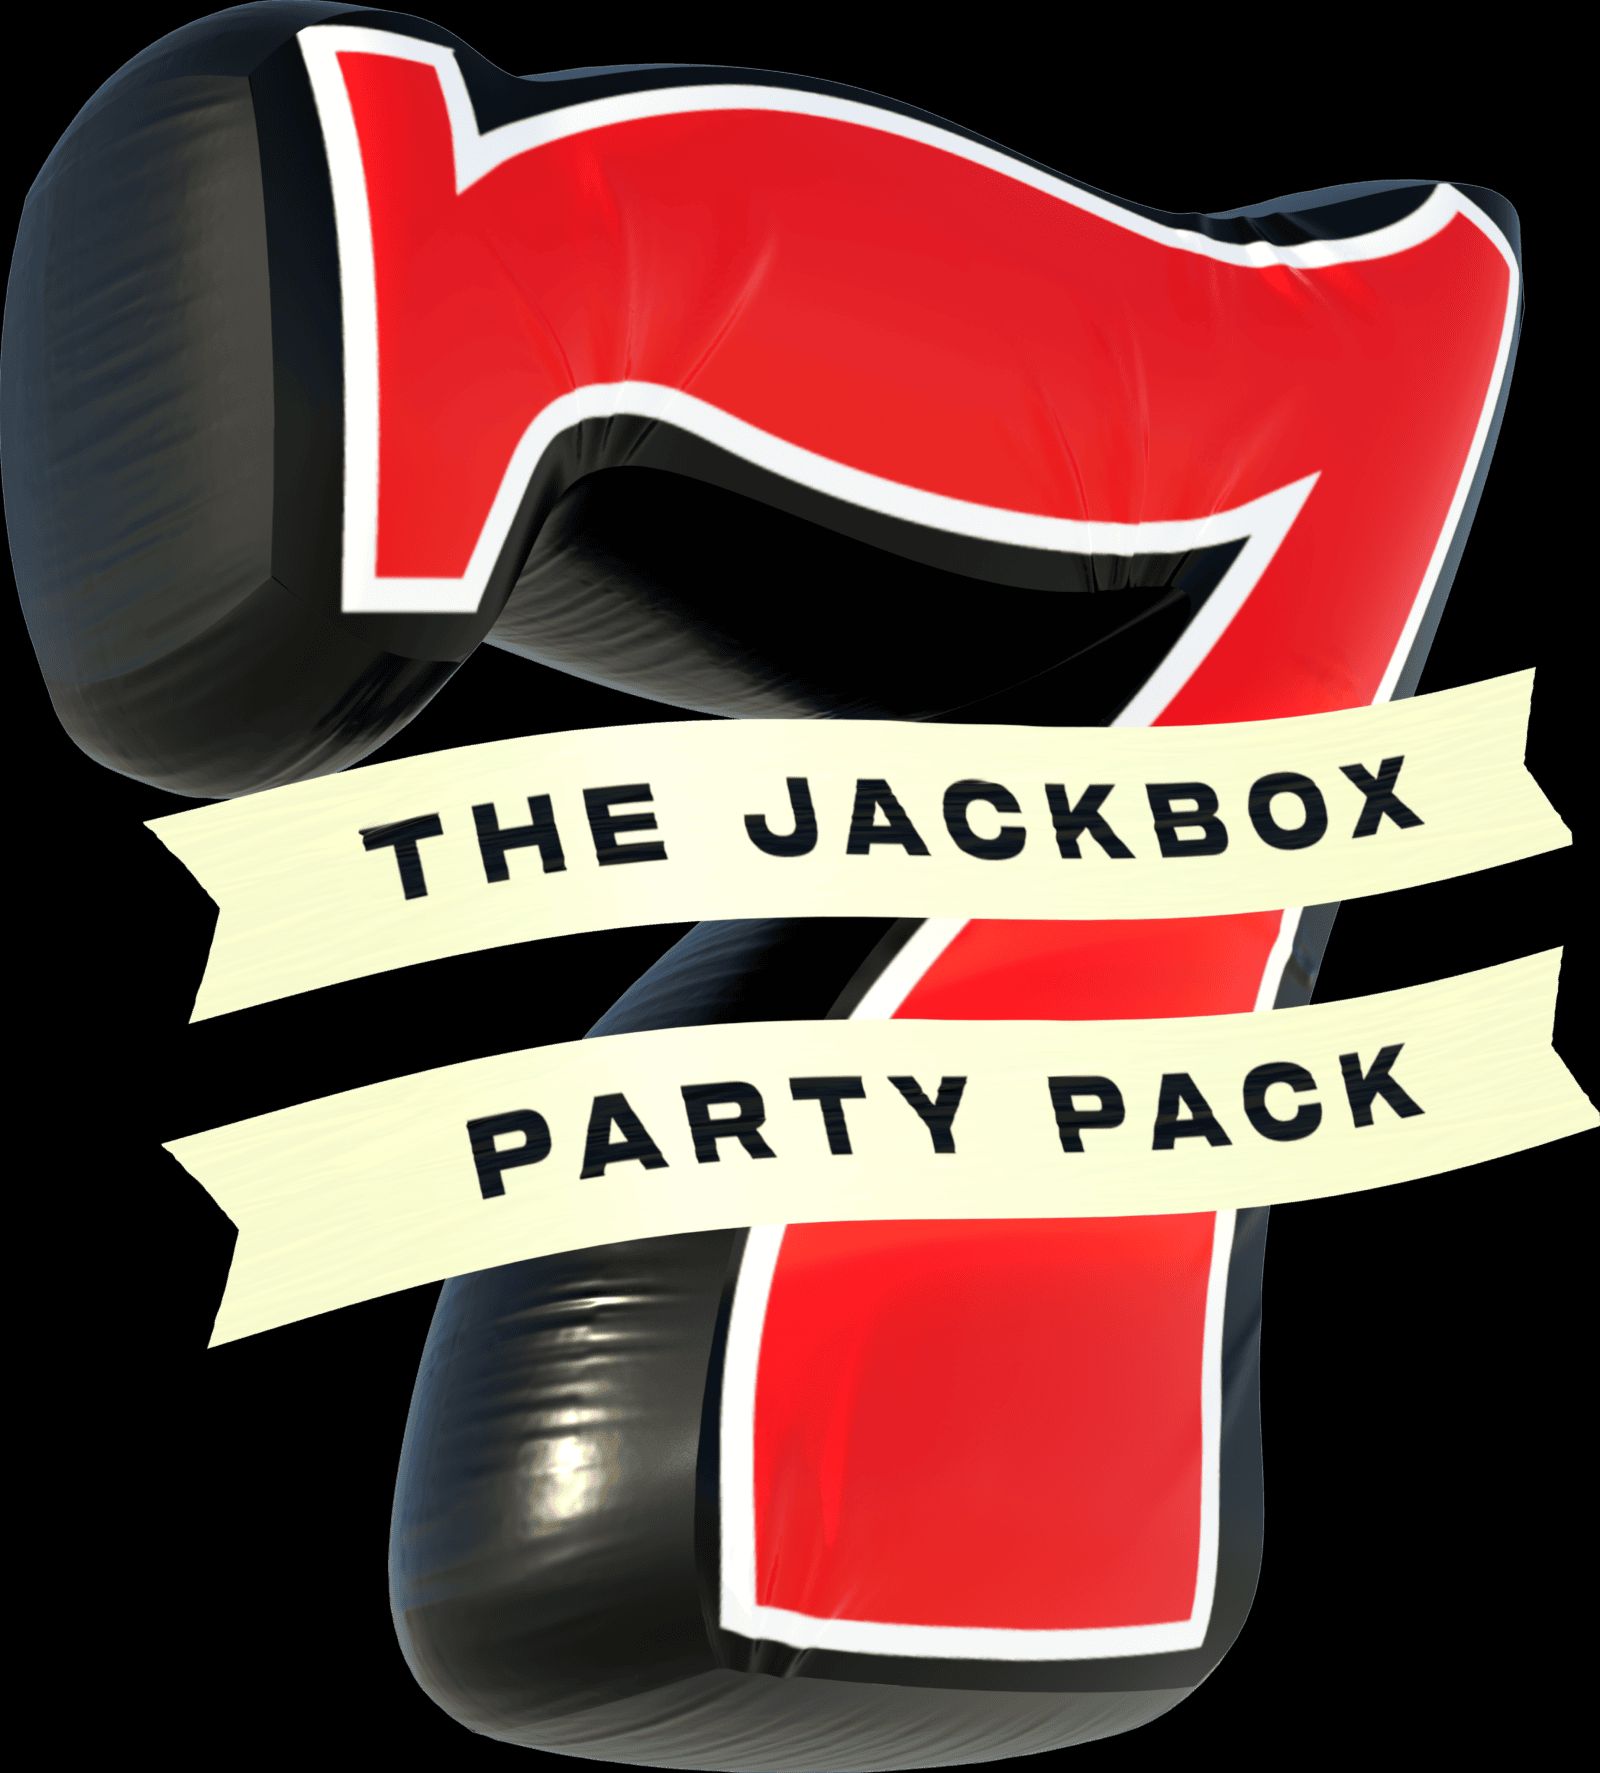 The Jackbox Party Pack Collection [9 Games], KaOs Repack